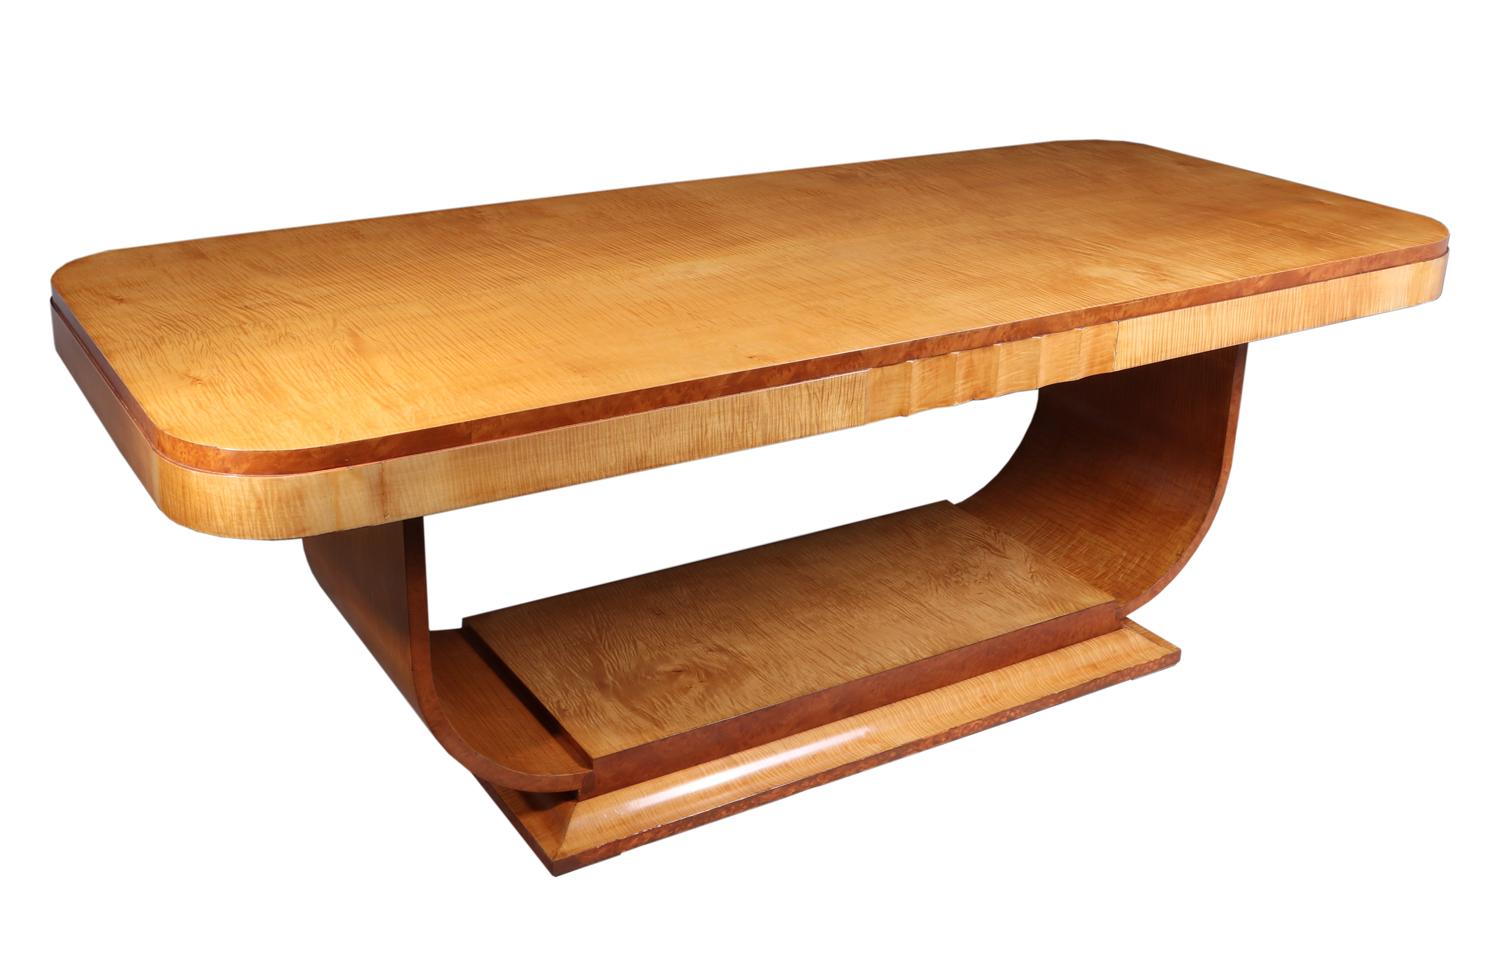 Mid-20th Century Art Deco Dining Table by Epstein in Sycamore, circa 1930